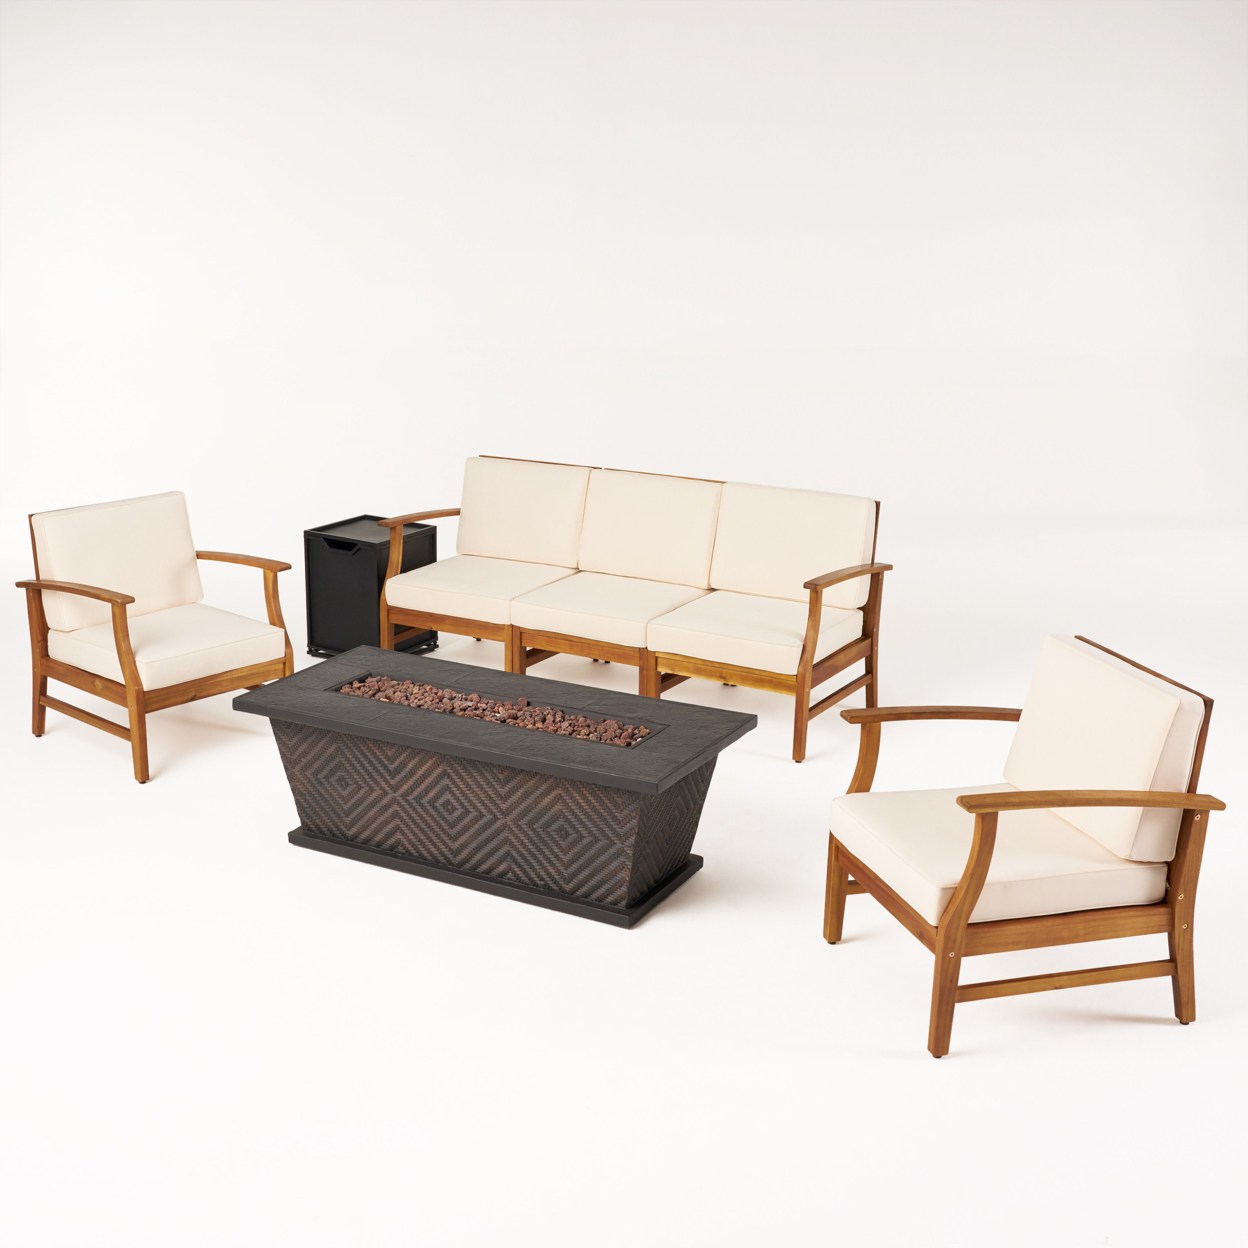 Driscoll Outdoor 5 Piece Acacia Wood Chat Set With Cushions And Fire Pit, Teak With Cream And Brown